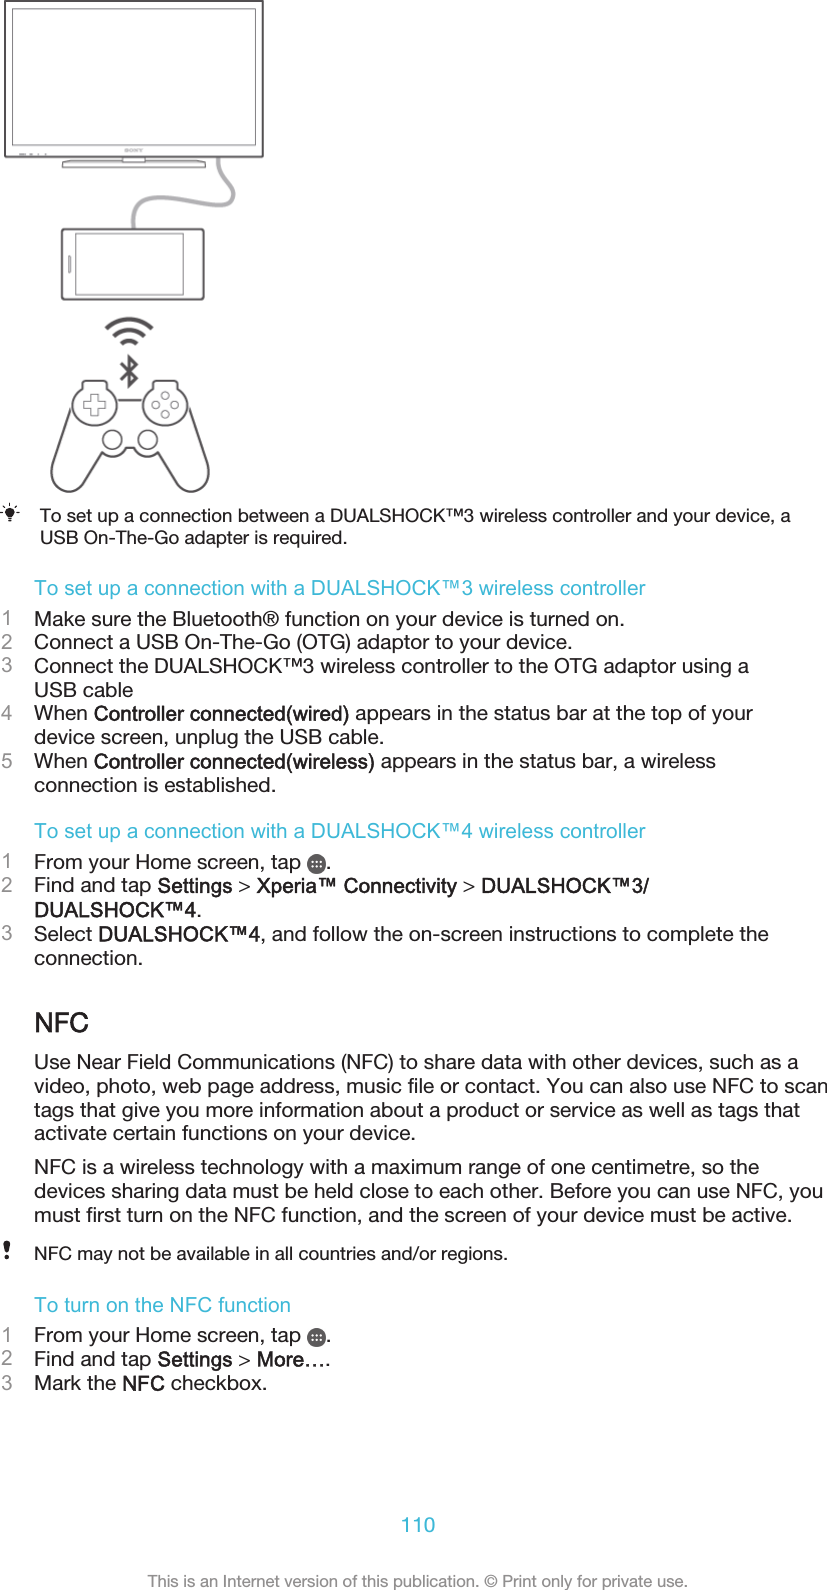 To set up a connection between a DUALSHOCK™3 wireless controller and your device, aUSB On-The-Go adapter is required.To set up a connection with a DUALSHOCK™3 wireless controller1Make sure the Bluetooth® function on your device is turned on.2Connect a USB On-The-Go (OTG) adaptor to your device.3Connect the DUALSHOCK™3 wireless controller to the OTG adaptor using aUSB cable4When Controller connected(wired) appears in the status bar at the top of yourdevice screen, unplug the USB cable.5When Controller connected(wireless) appears in the status bar, a wirelessconnection is established.To set up a connection with a DUALSHOCK™4 wireless controller1From your Home screen, tap  .2Find and tap Settings &gt; Xperia™ Connectivity &gt; DUALSHOCK™3/DUALSHOCK™4.3Select DUALSHOCK™4, and follow the on-screen instructions to complete theconnection.NFCUse Near Field Communications (NFC) to share data with other devices, such as avideo, photo, web page address, music file or contact. You can also use NFC to scantags that give you more information about a product or service as well as tags thatactivate certain functions on your device.NFC is a wireless technology with a maximum range of one centimetre, so thedevices sharing data must be held close to each other. Before you can use NFC, youmust first turn on the NFC function, and the screen of your device must be active.NFC may not be available in all countries and/or regions.To turn on the NFC function1From your Home screen, tap  .2Find and tap Settings &gt; More….3Mark the NFC checkbox.110This is an Internet version of this publication. © Print only for private use.